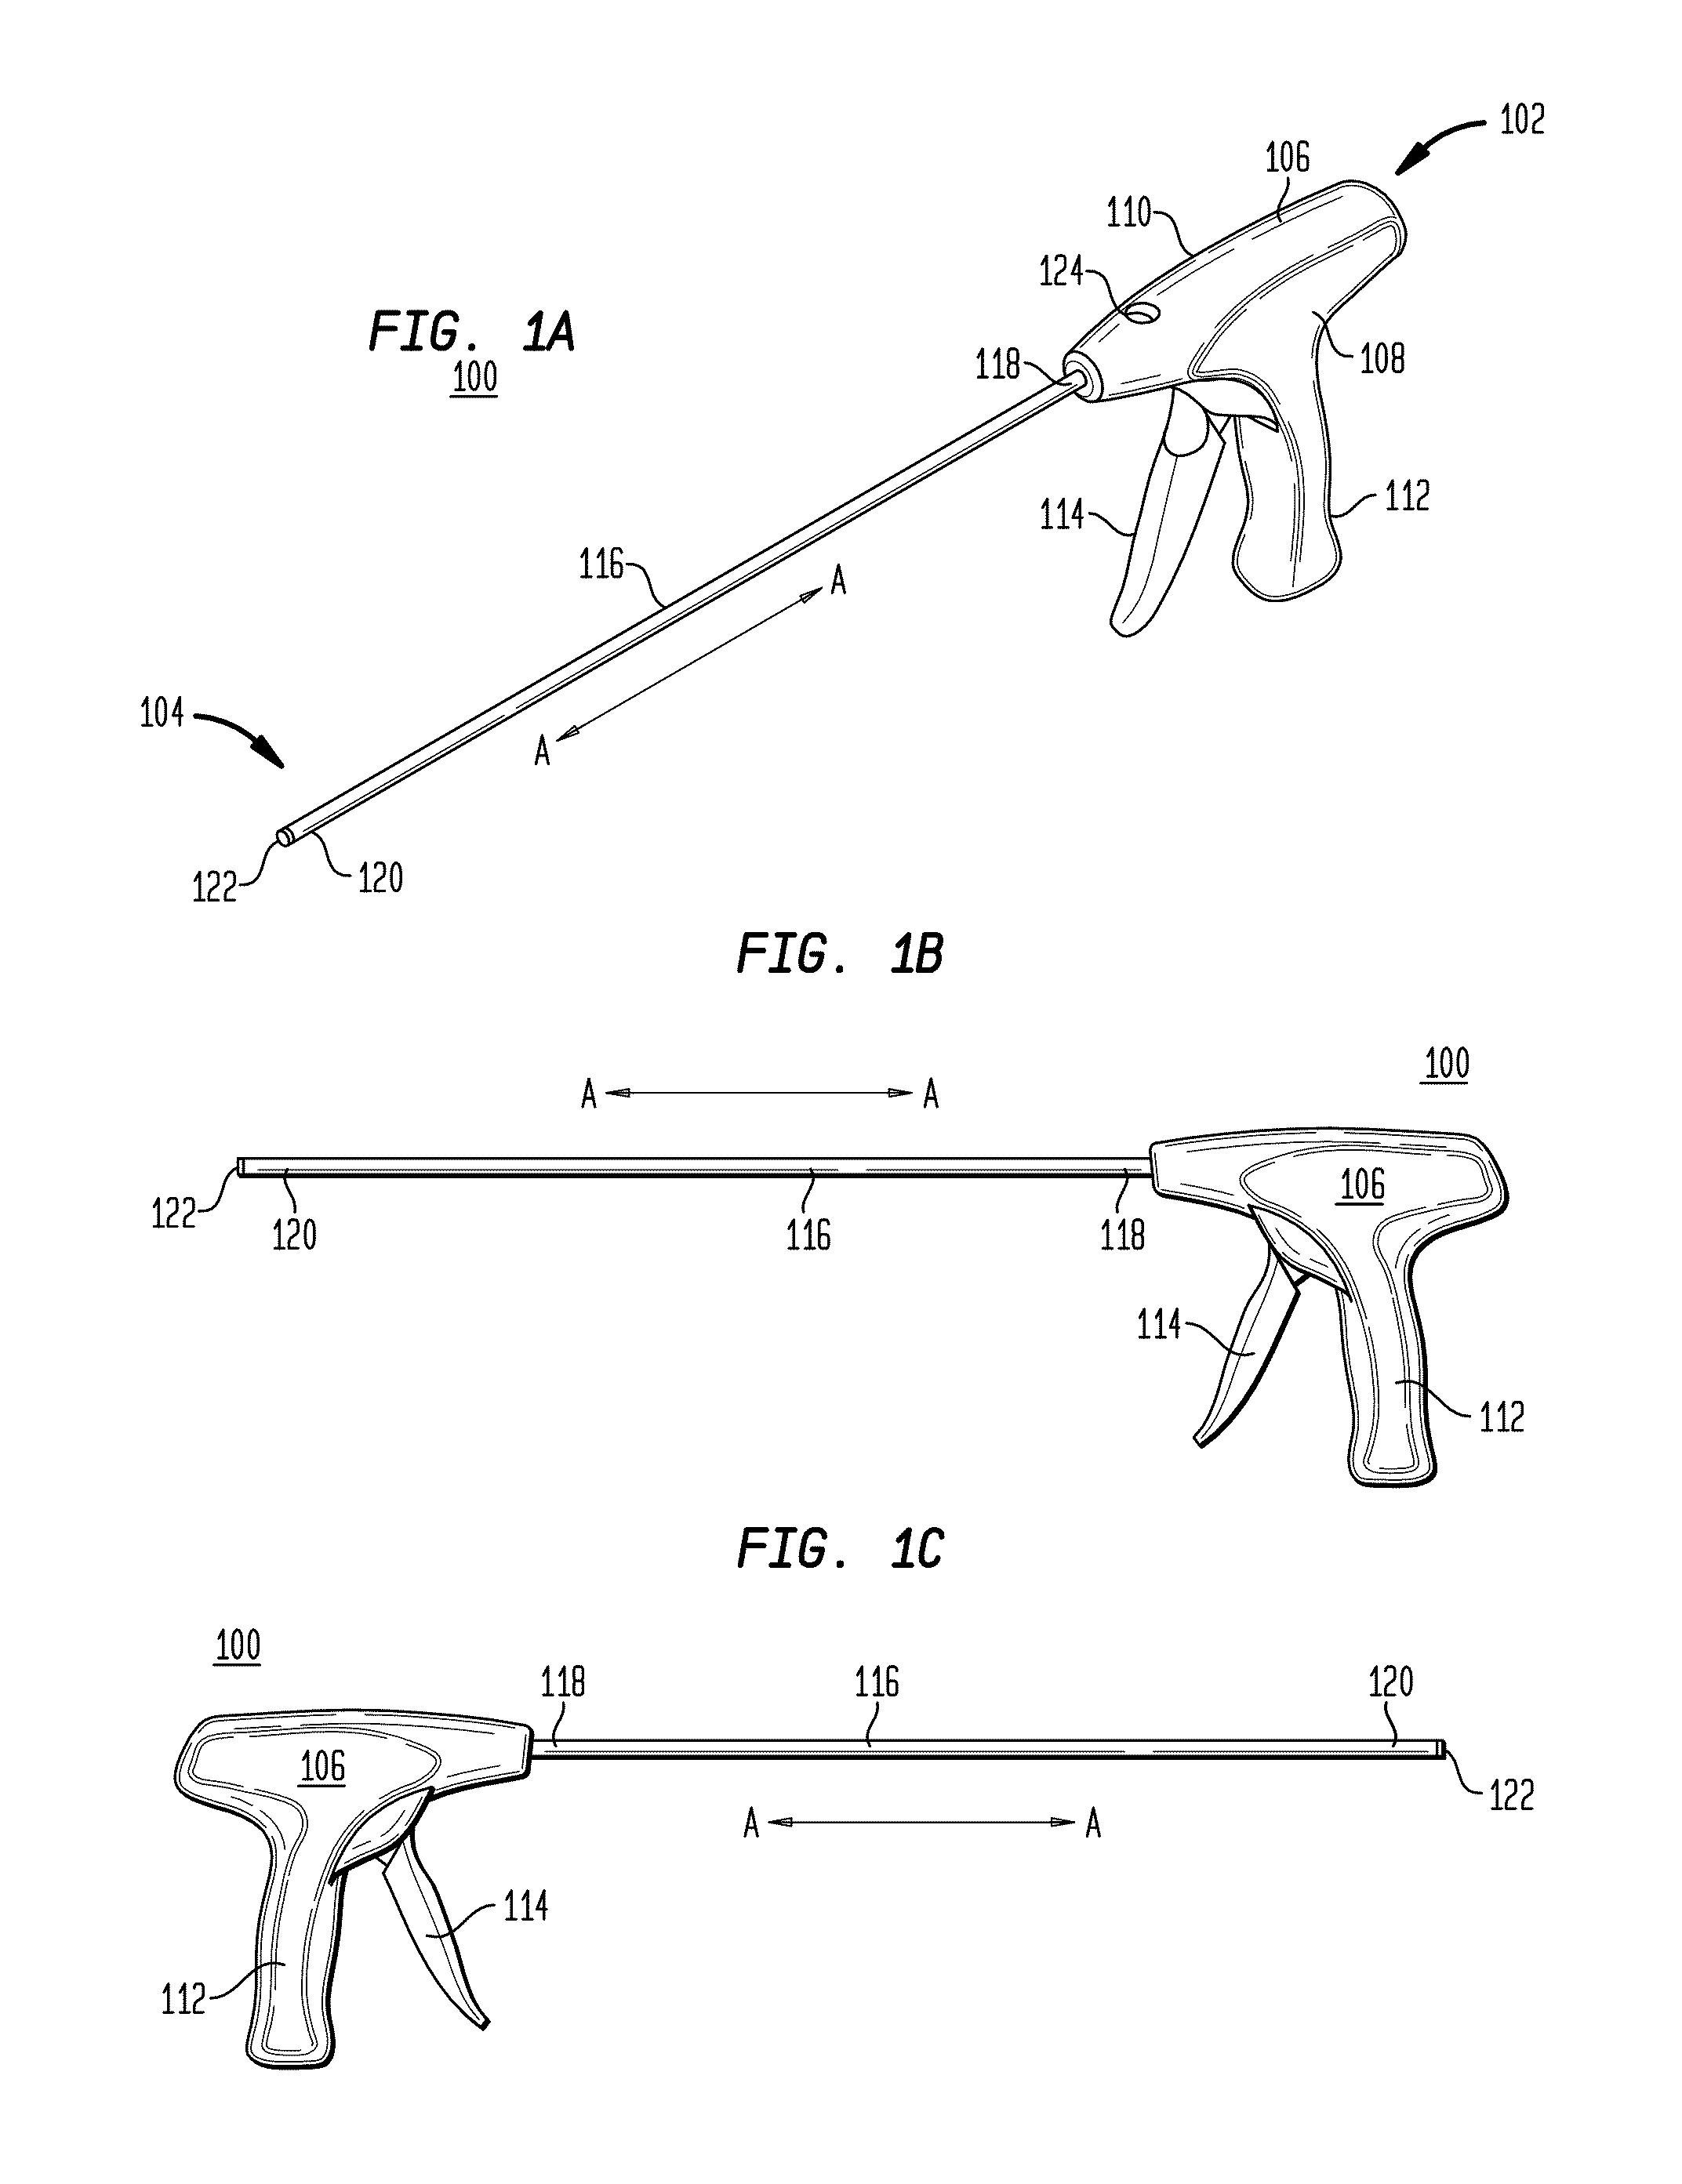 Applicator instruments having curved and articulating shafts for deploying surgical fasteners and methods therefor